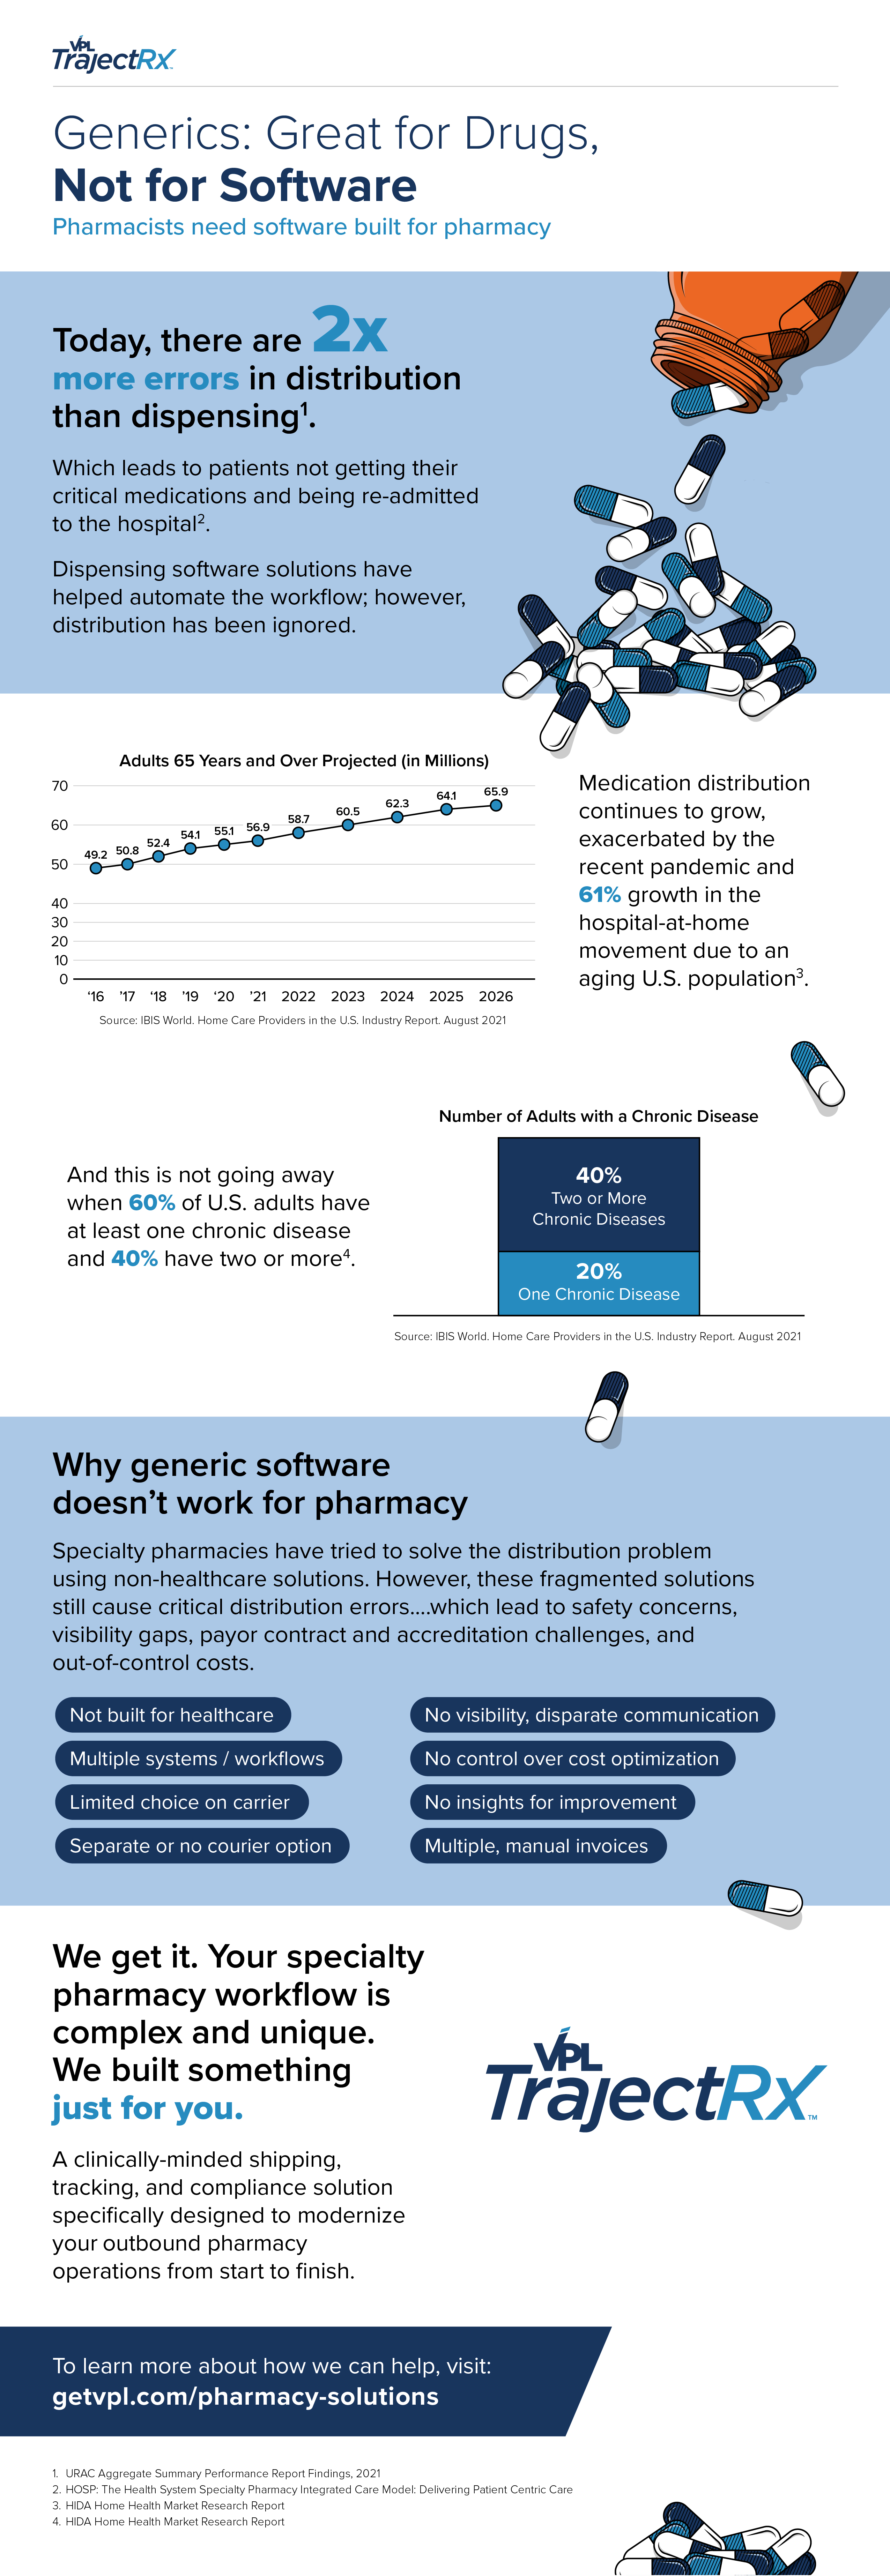 Read our VPL TrajectRx Infographic to learn why generics are great for drugs, not for software!